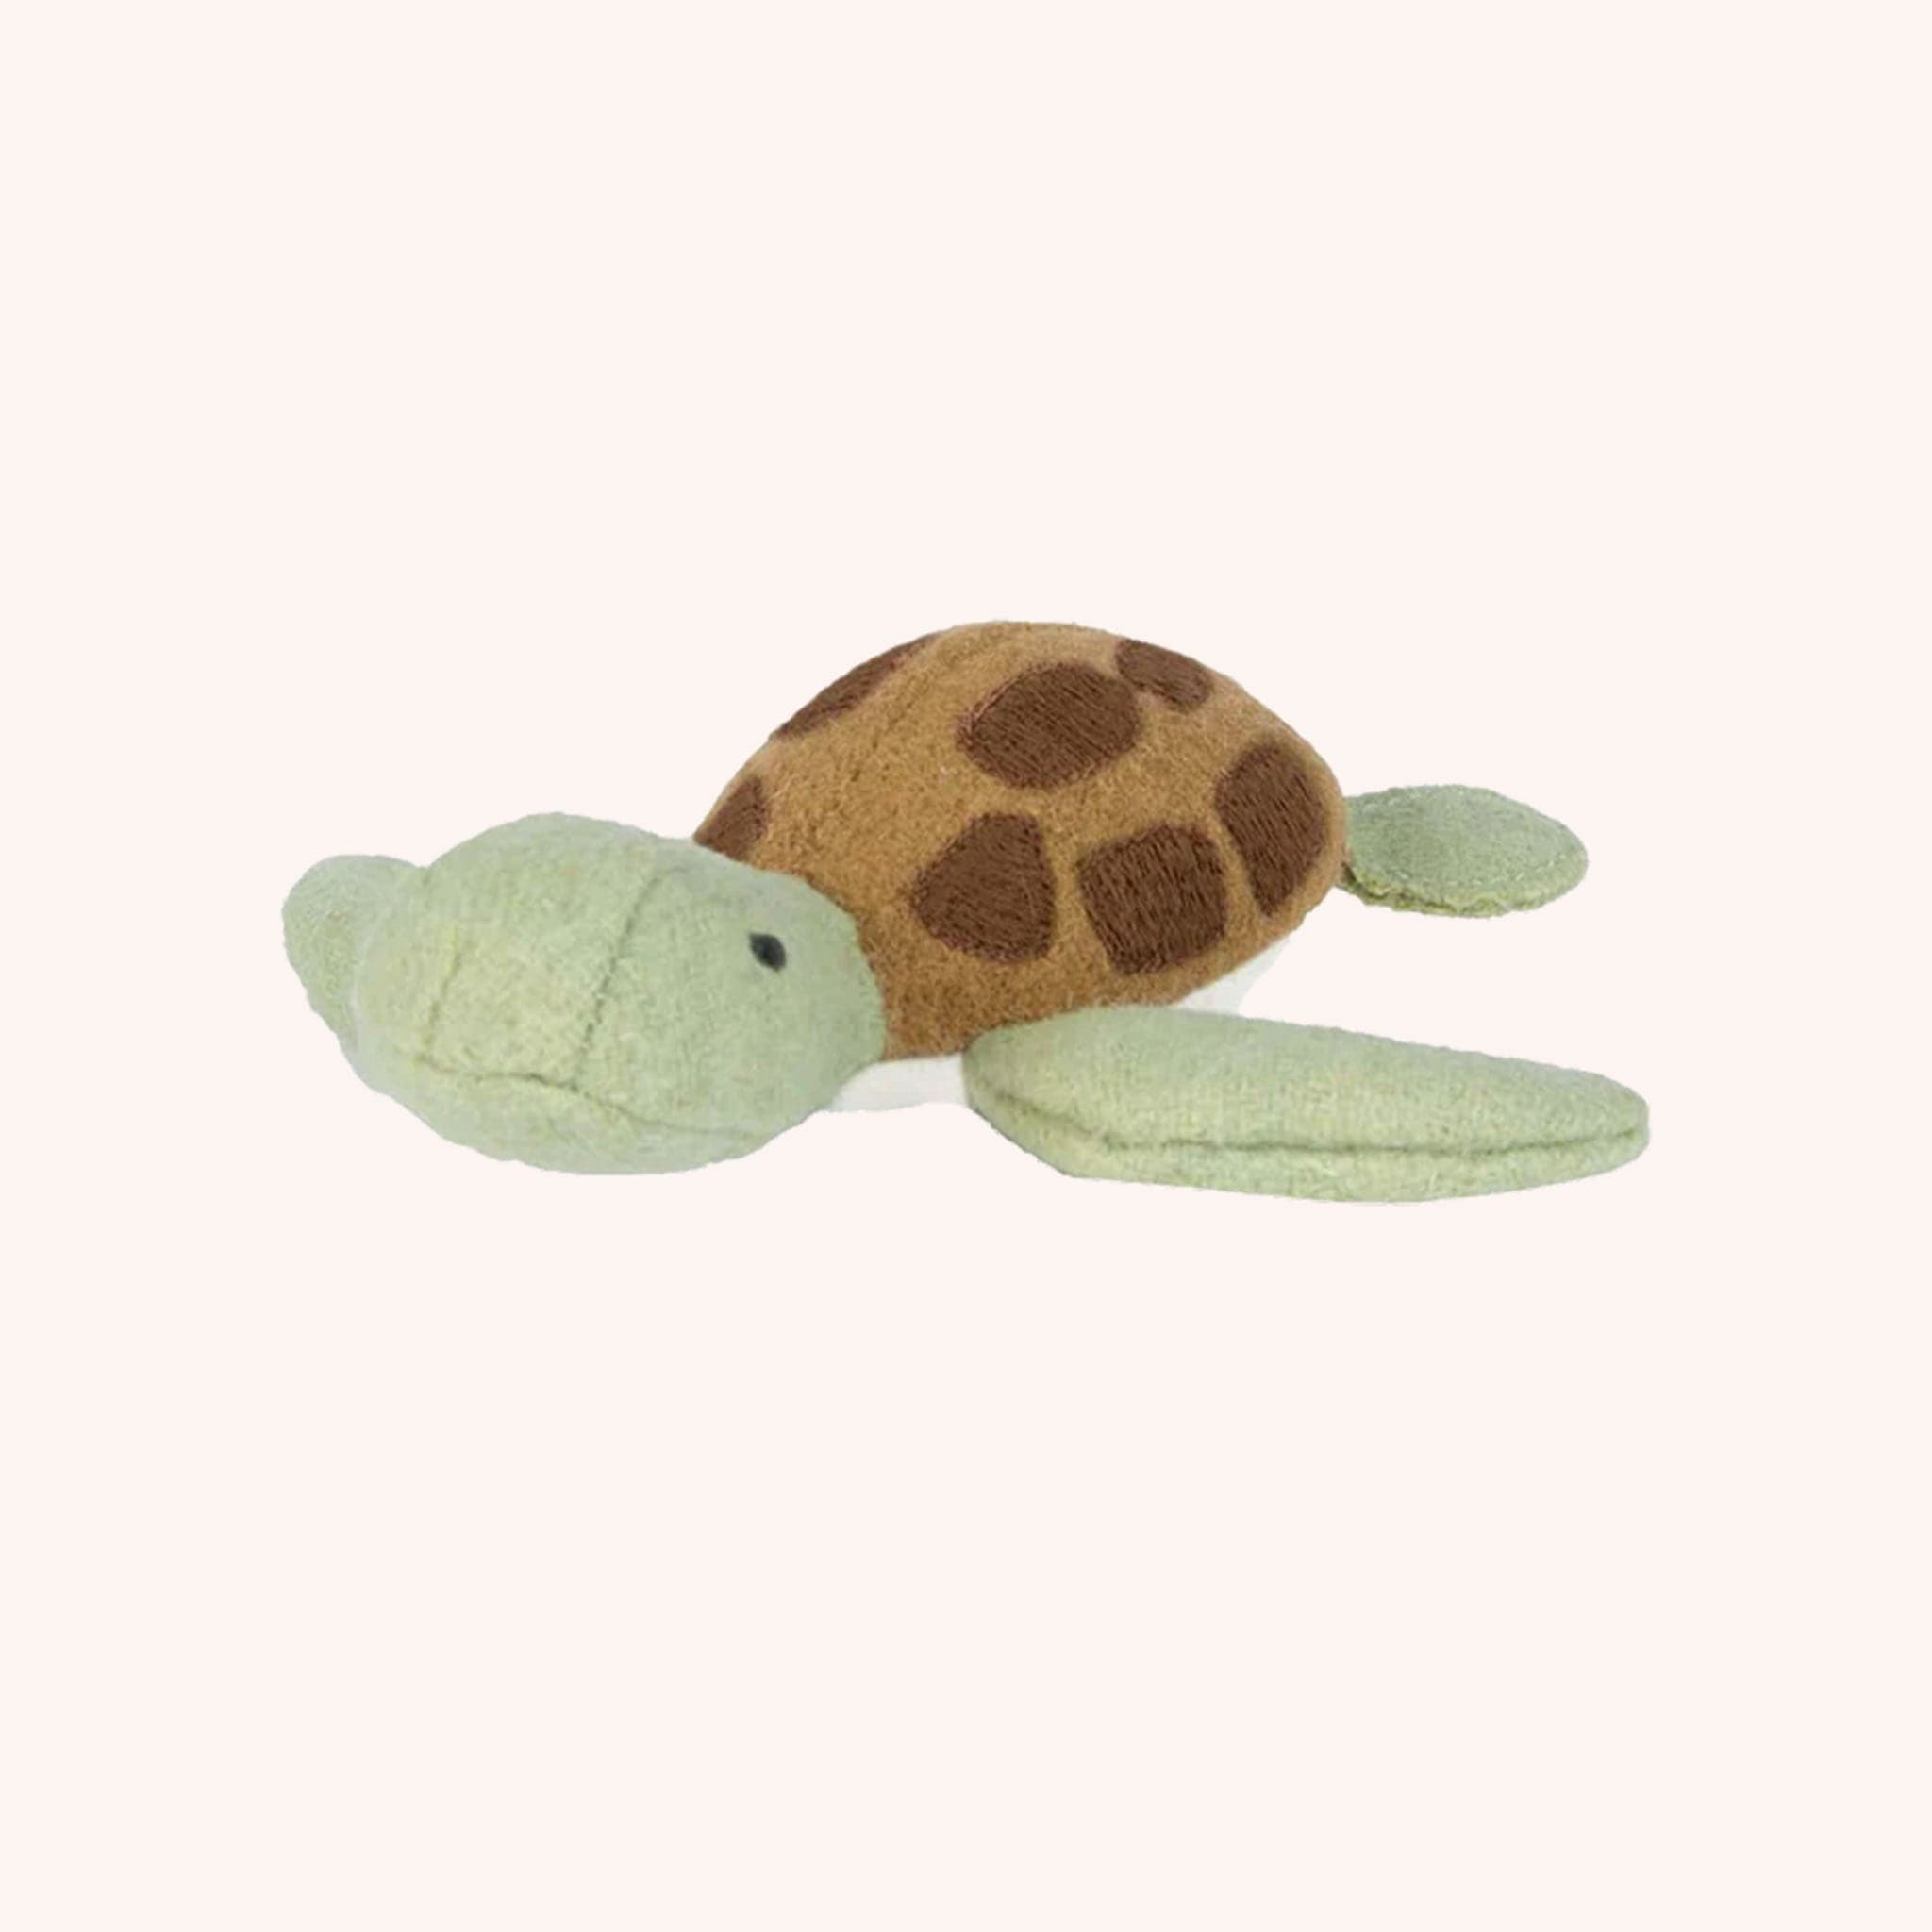 A close up of the sea turtle toy that has a light green head and fins, along with a two toned brown shell.